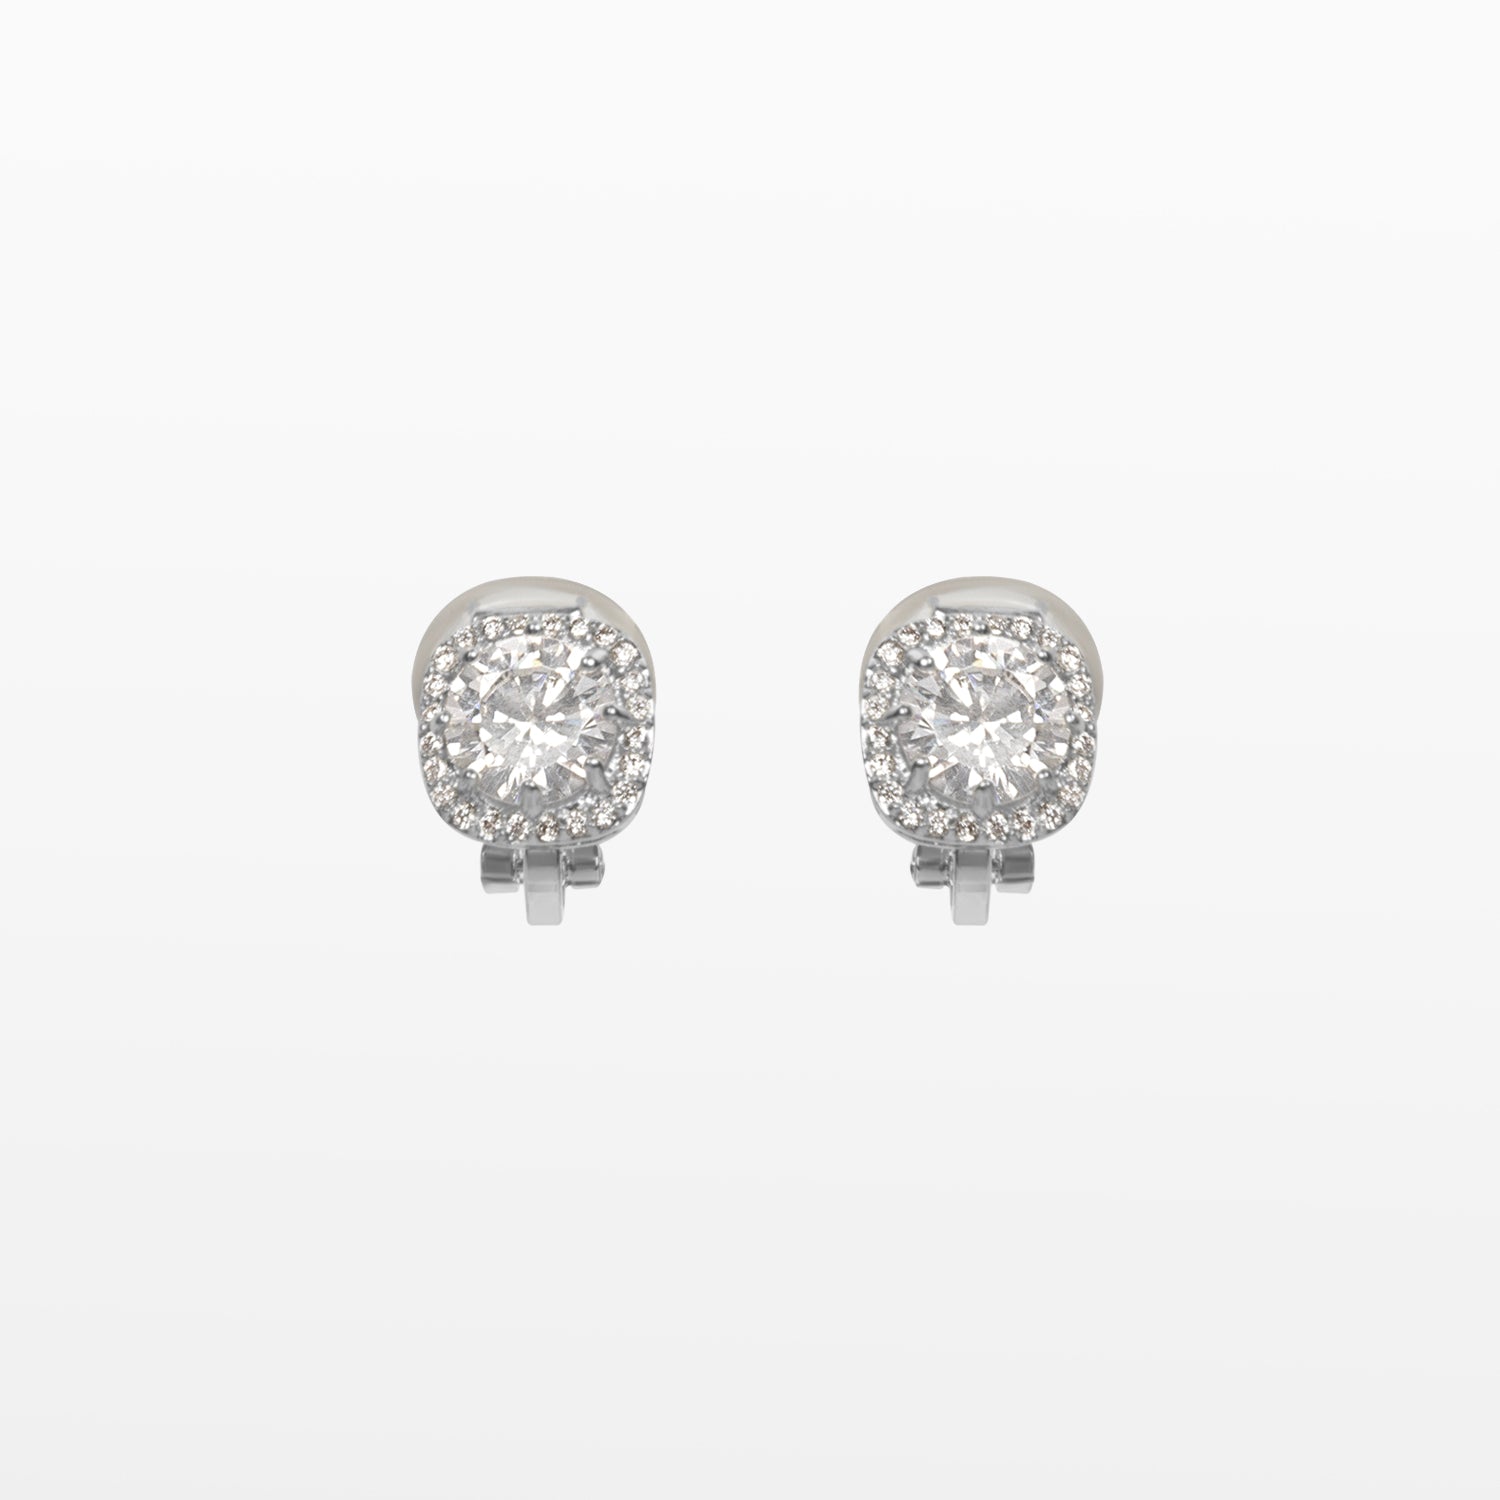 Image of the Cushion Stud Clip-On Earrings in Silver boast a padded closure type and are suited for all types of ears. With secure hold and comfortable wear duration of up to 8-12 hours, this one pair of earrings is crafted from gold plated copper and finished with Cubic Zirconia.